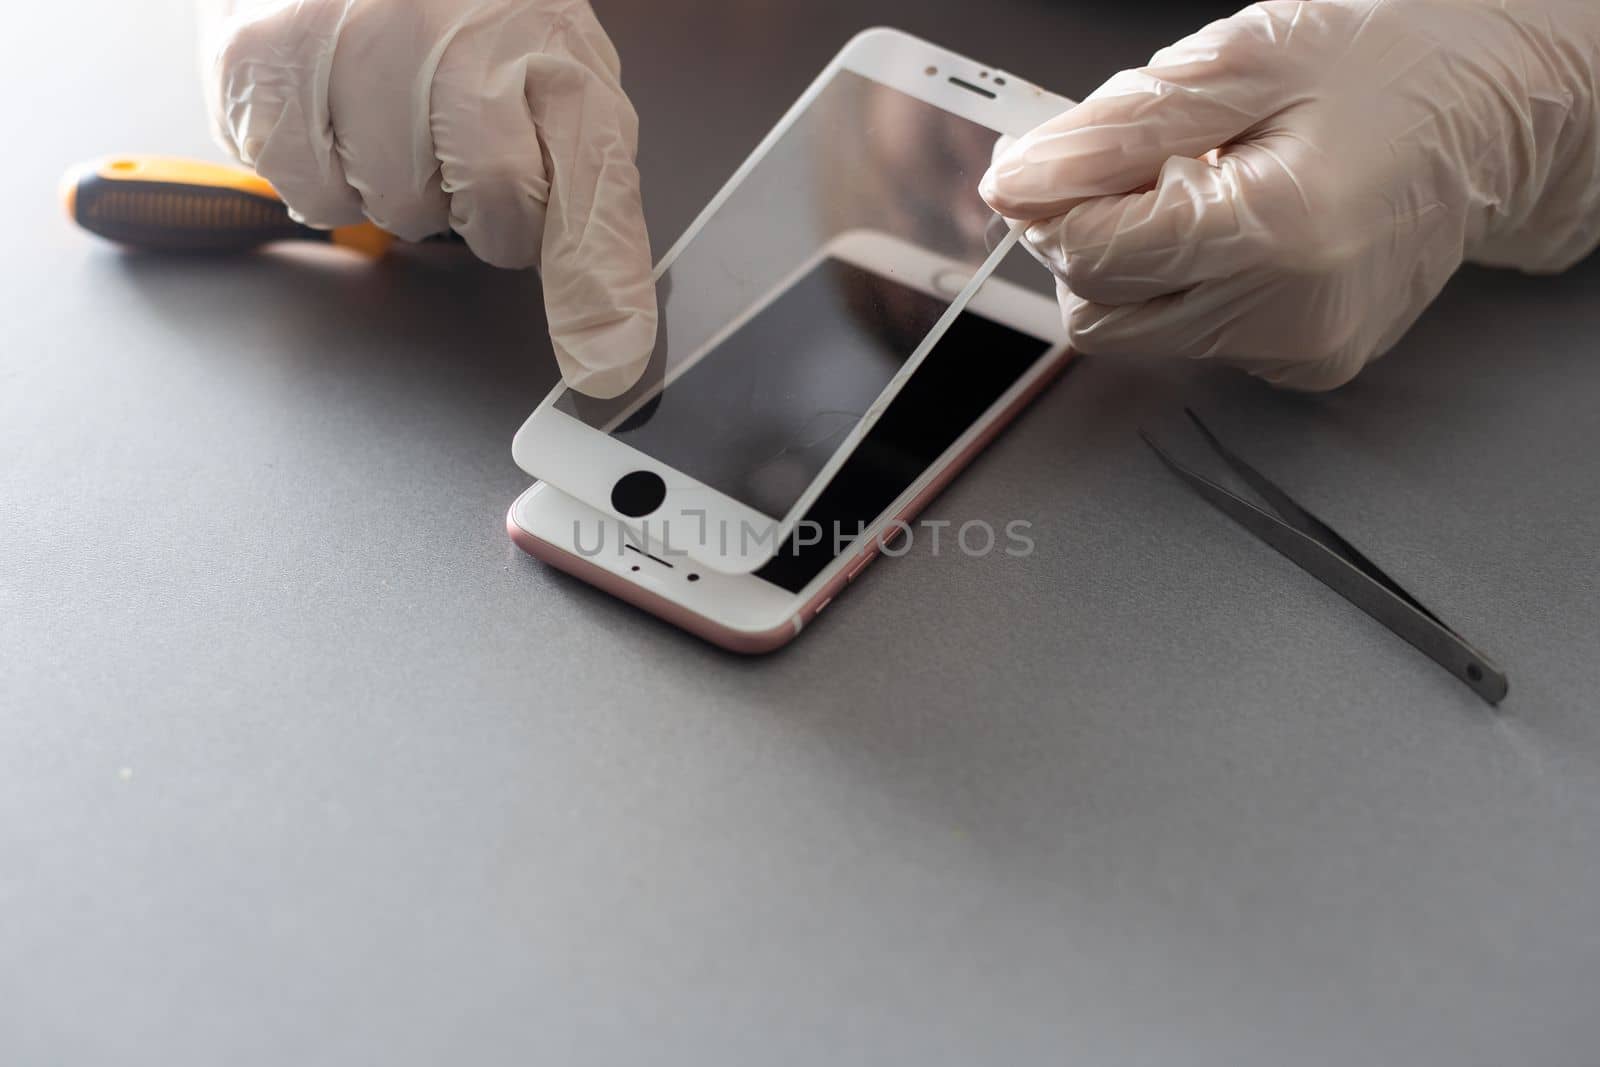 a person places a protective glass or film on a smartphone. copy space